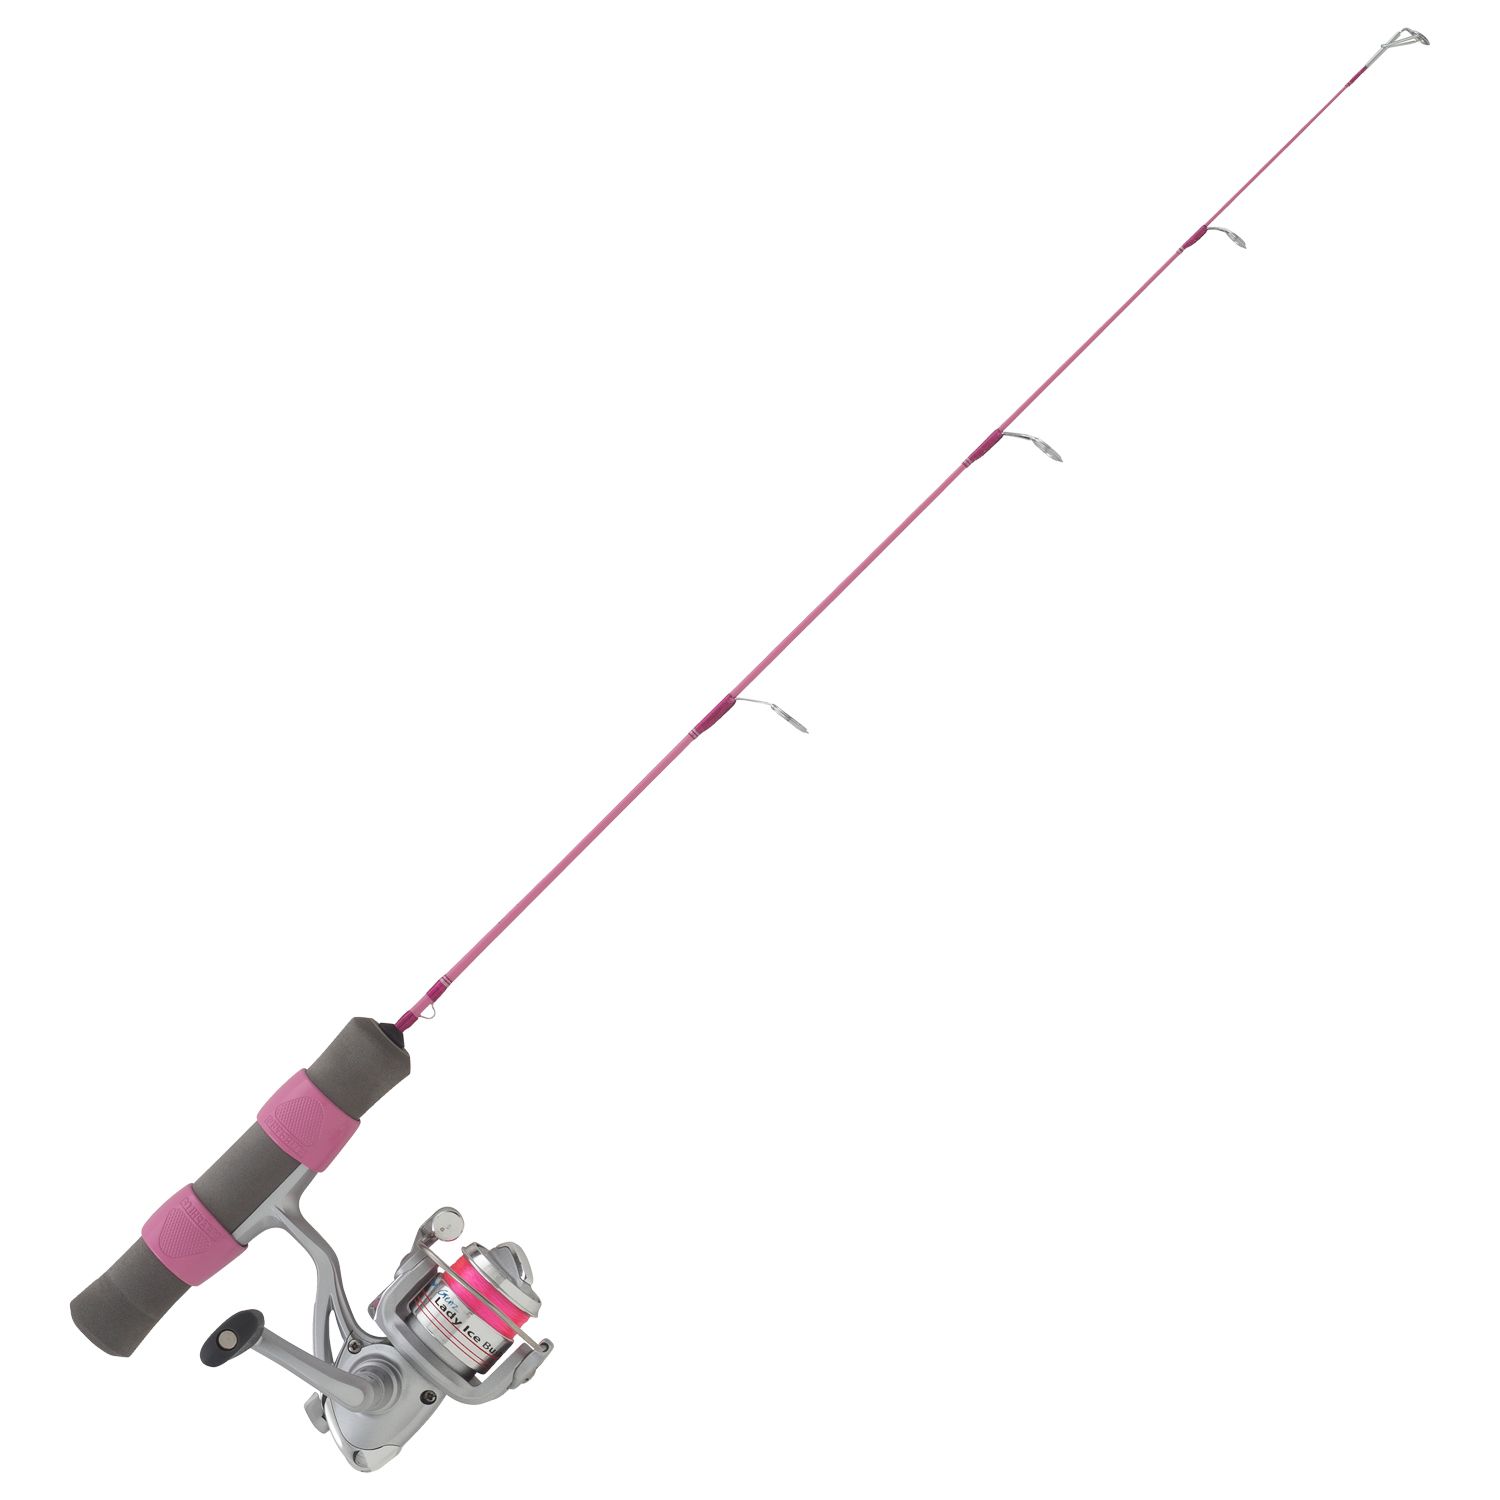 Dick's Sporting Goods Clam Dave Genz Lady Ice Buster Ice Fishing Combos